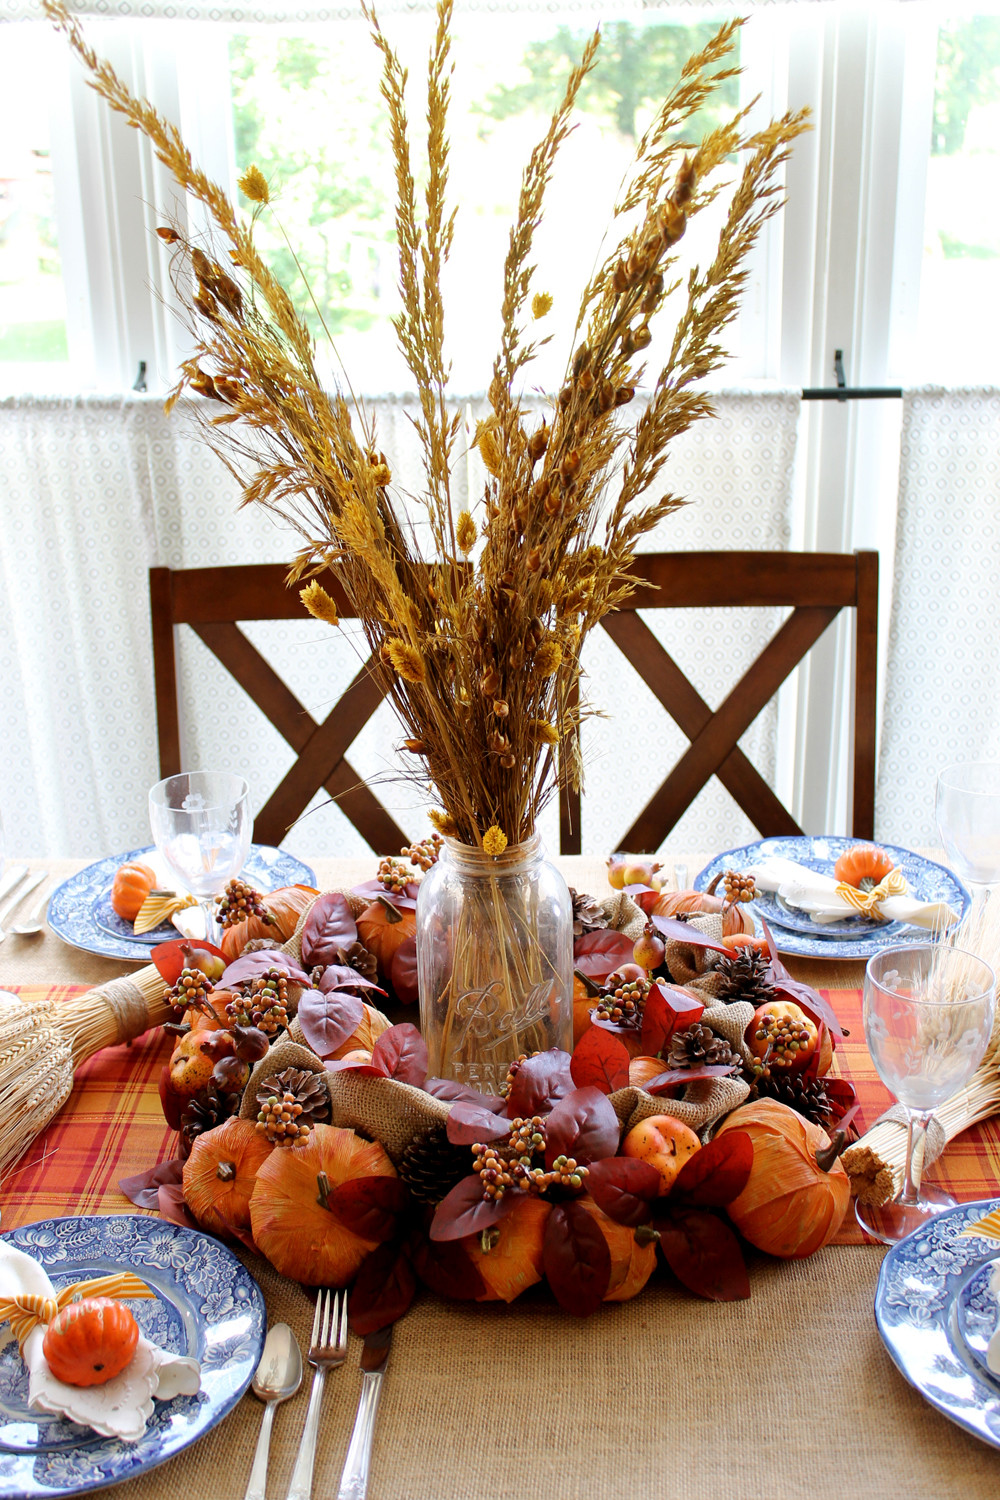 DIY Thanksgiving Decorations
 DIY Thanksgiving Decorations for Your Table The Country